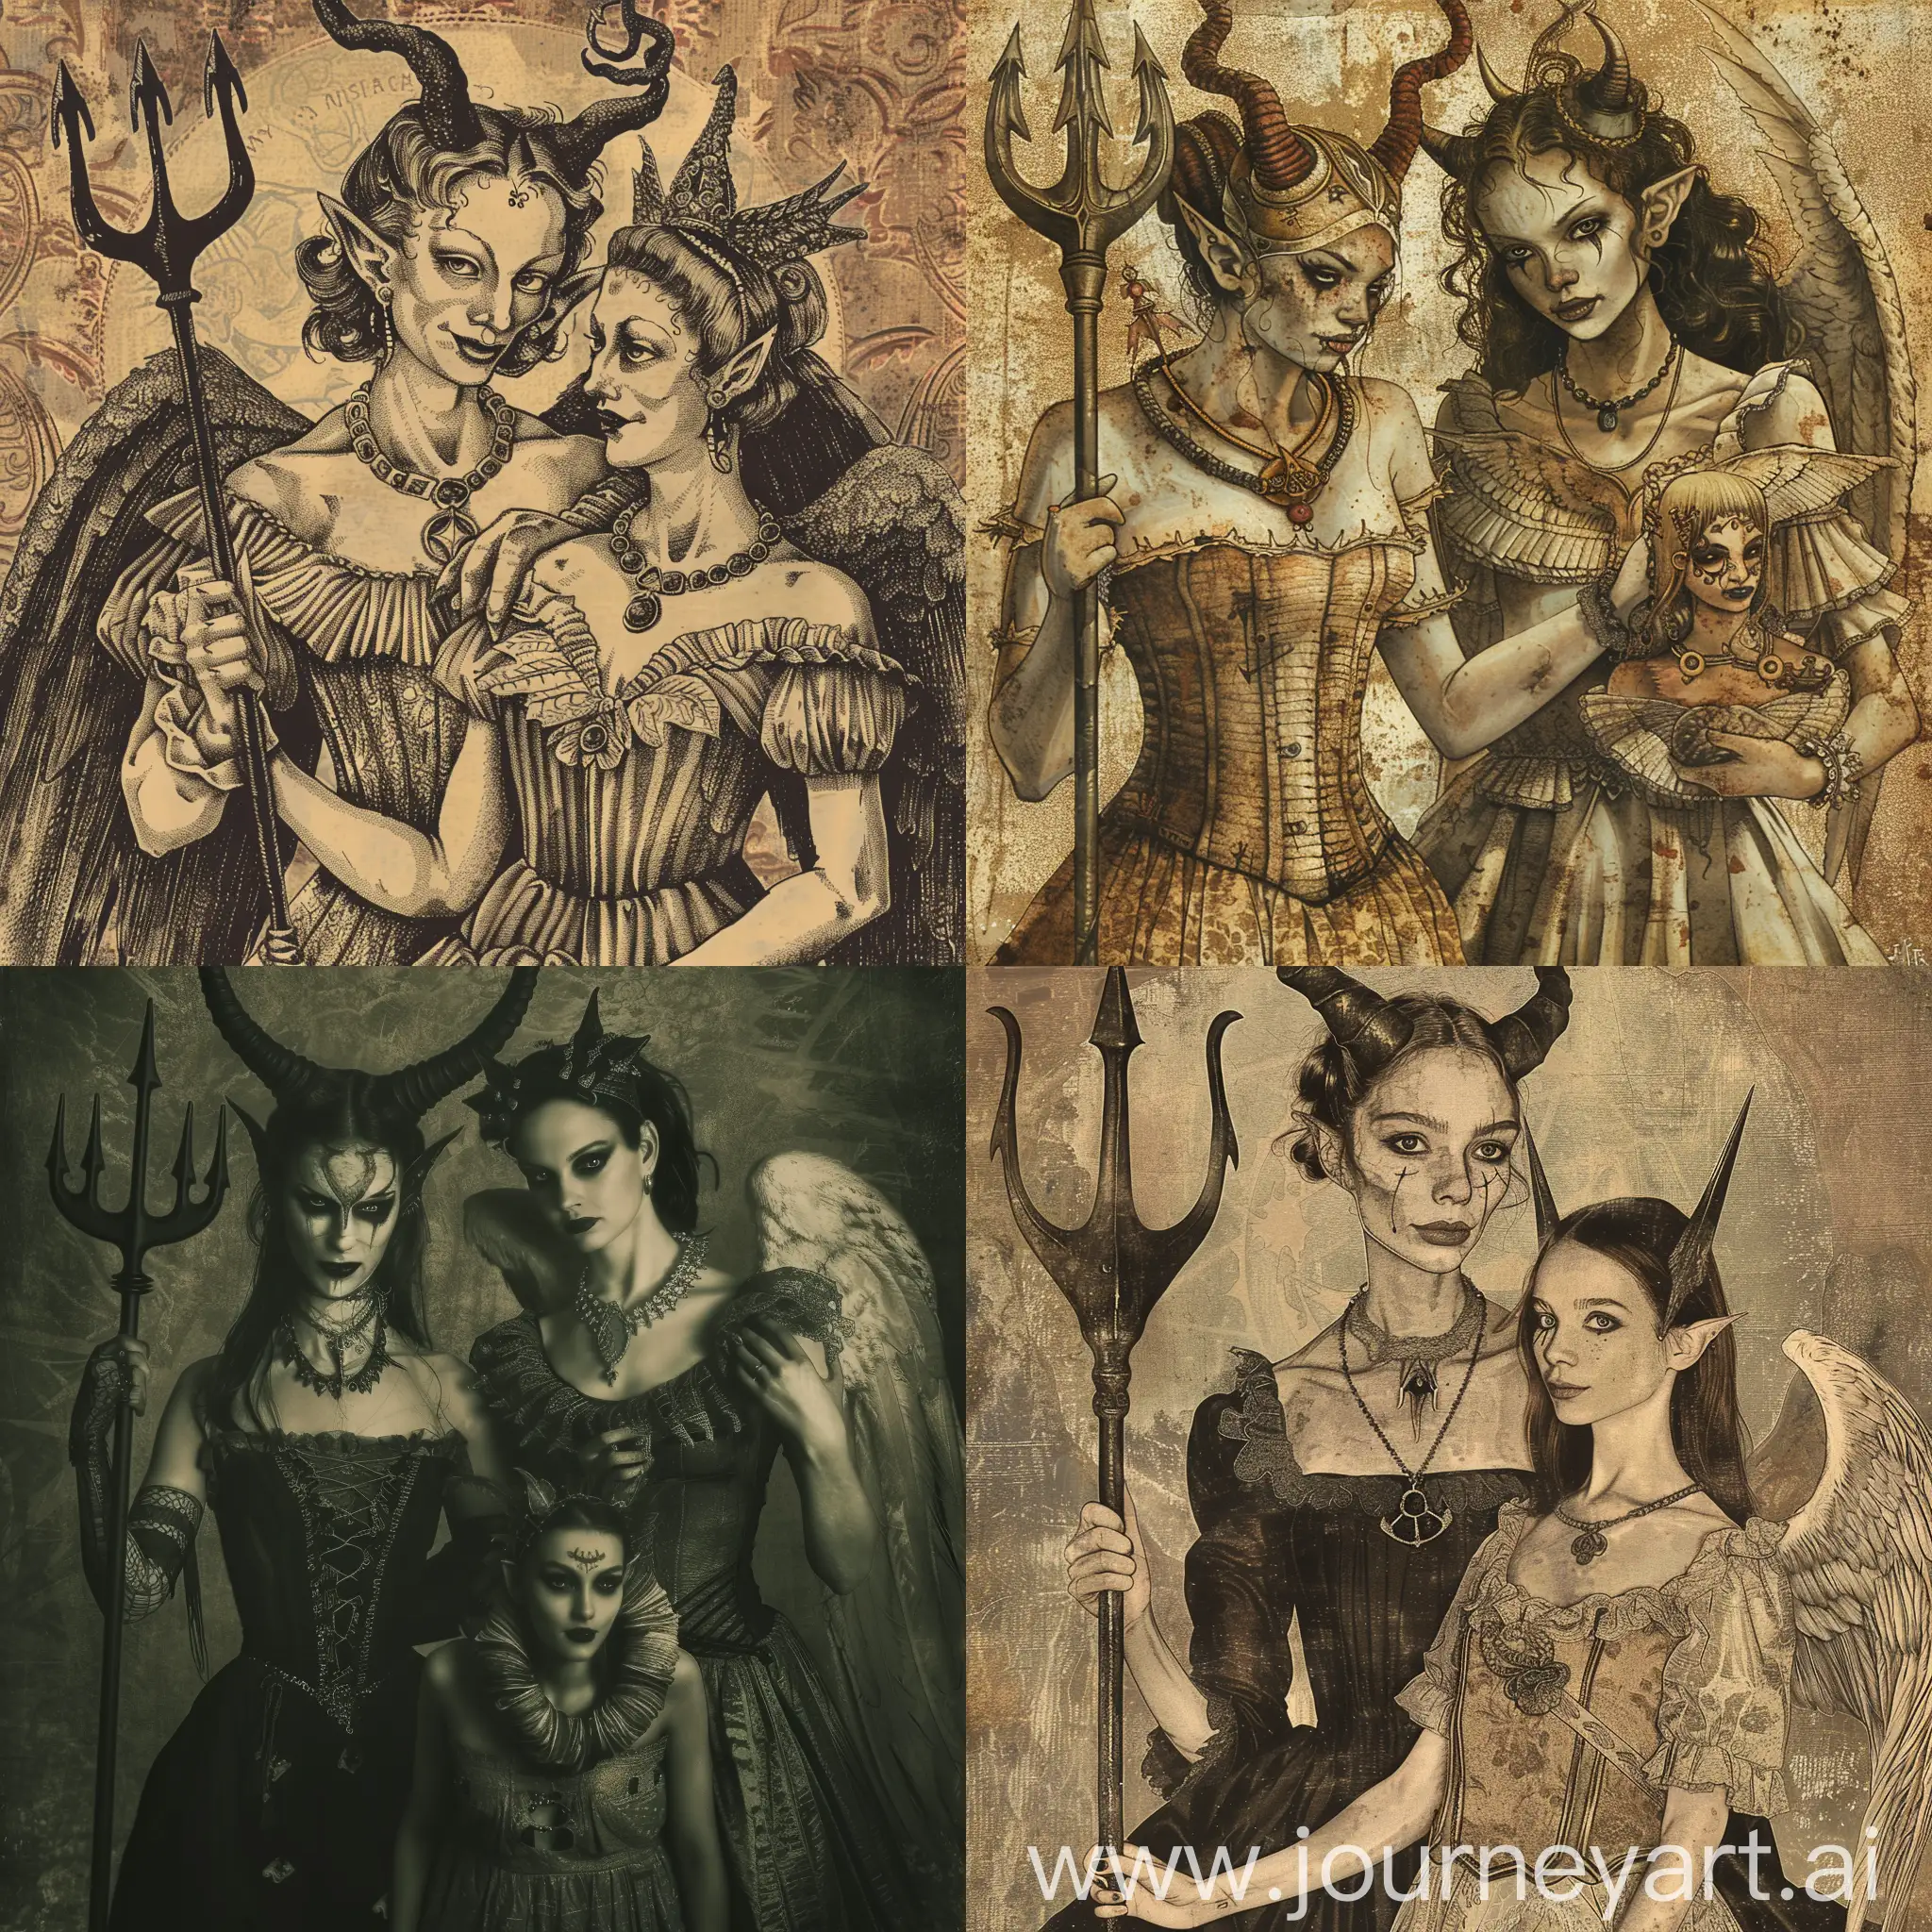 A demon woman holding a trident in her left hand and holding a collared angel woman in her right hand